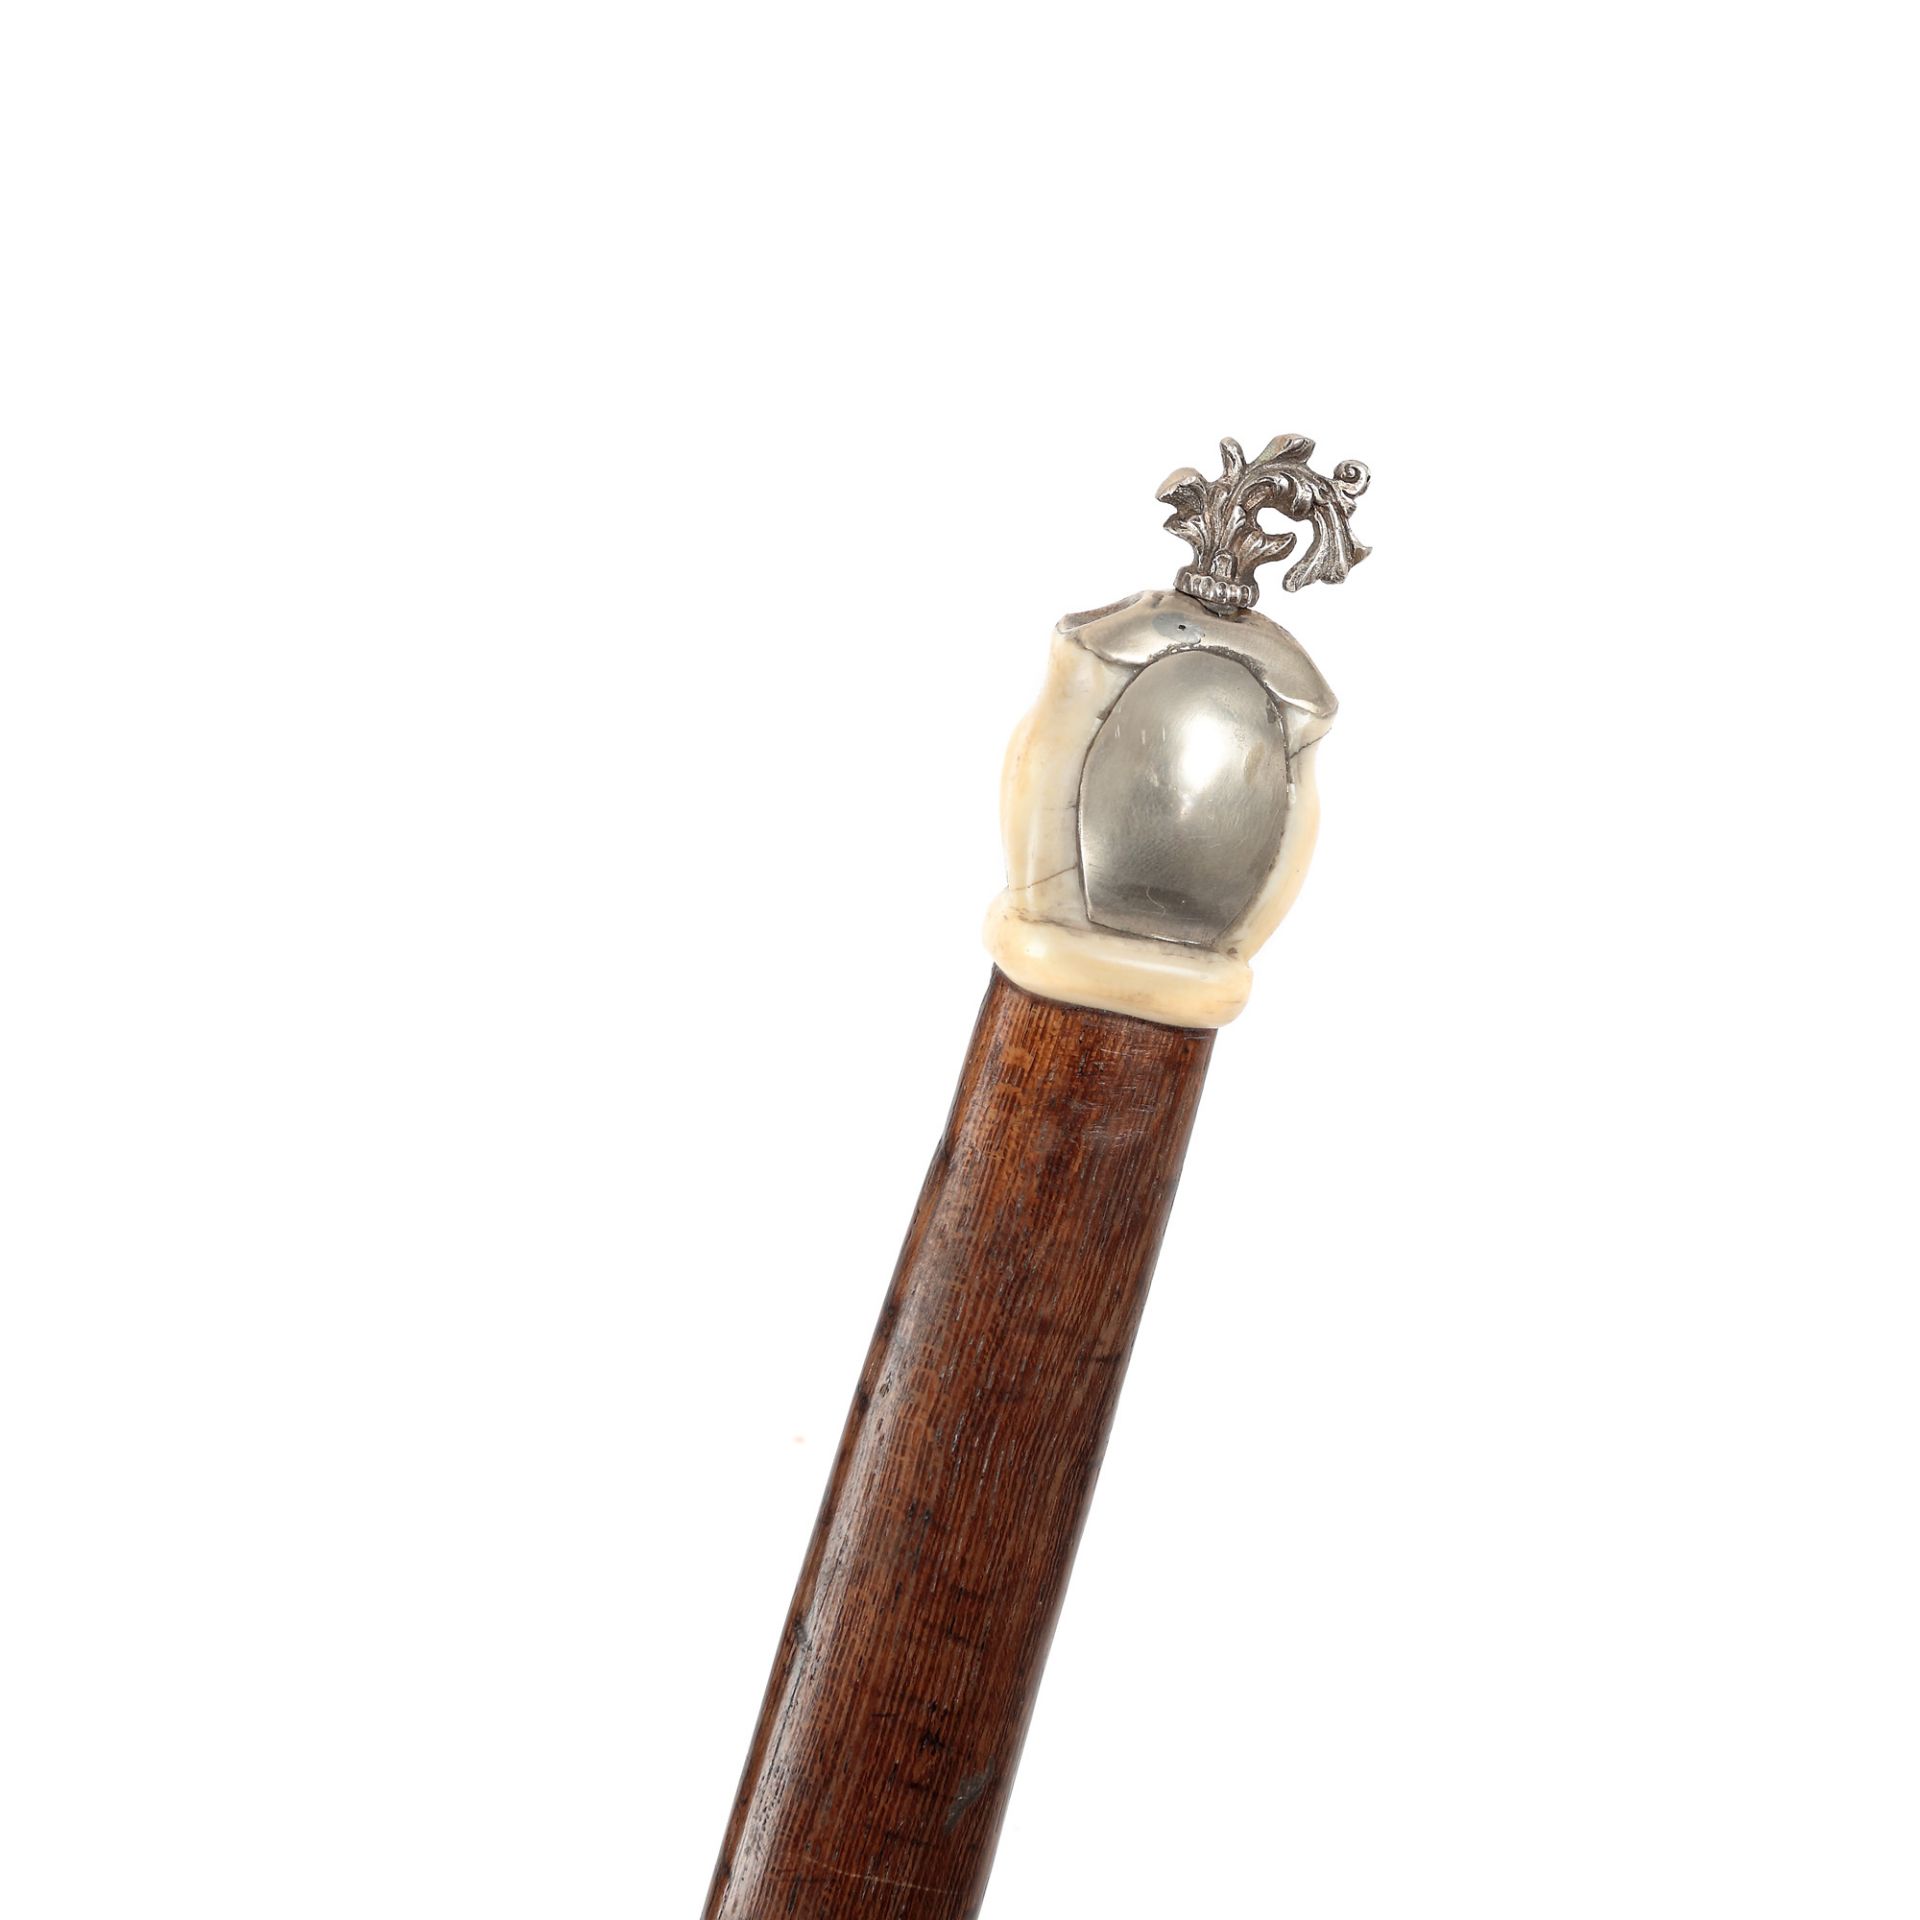 Ceremonial dagger, handle and sheath decorated with silver and ivory, bearing the Cross of Malta and - Image 4 of 5